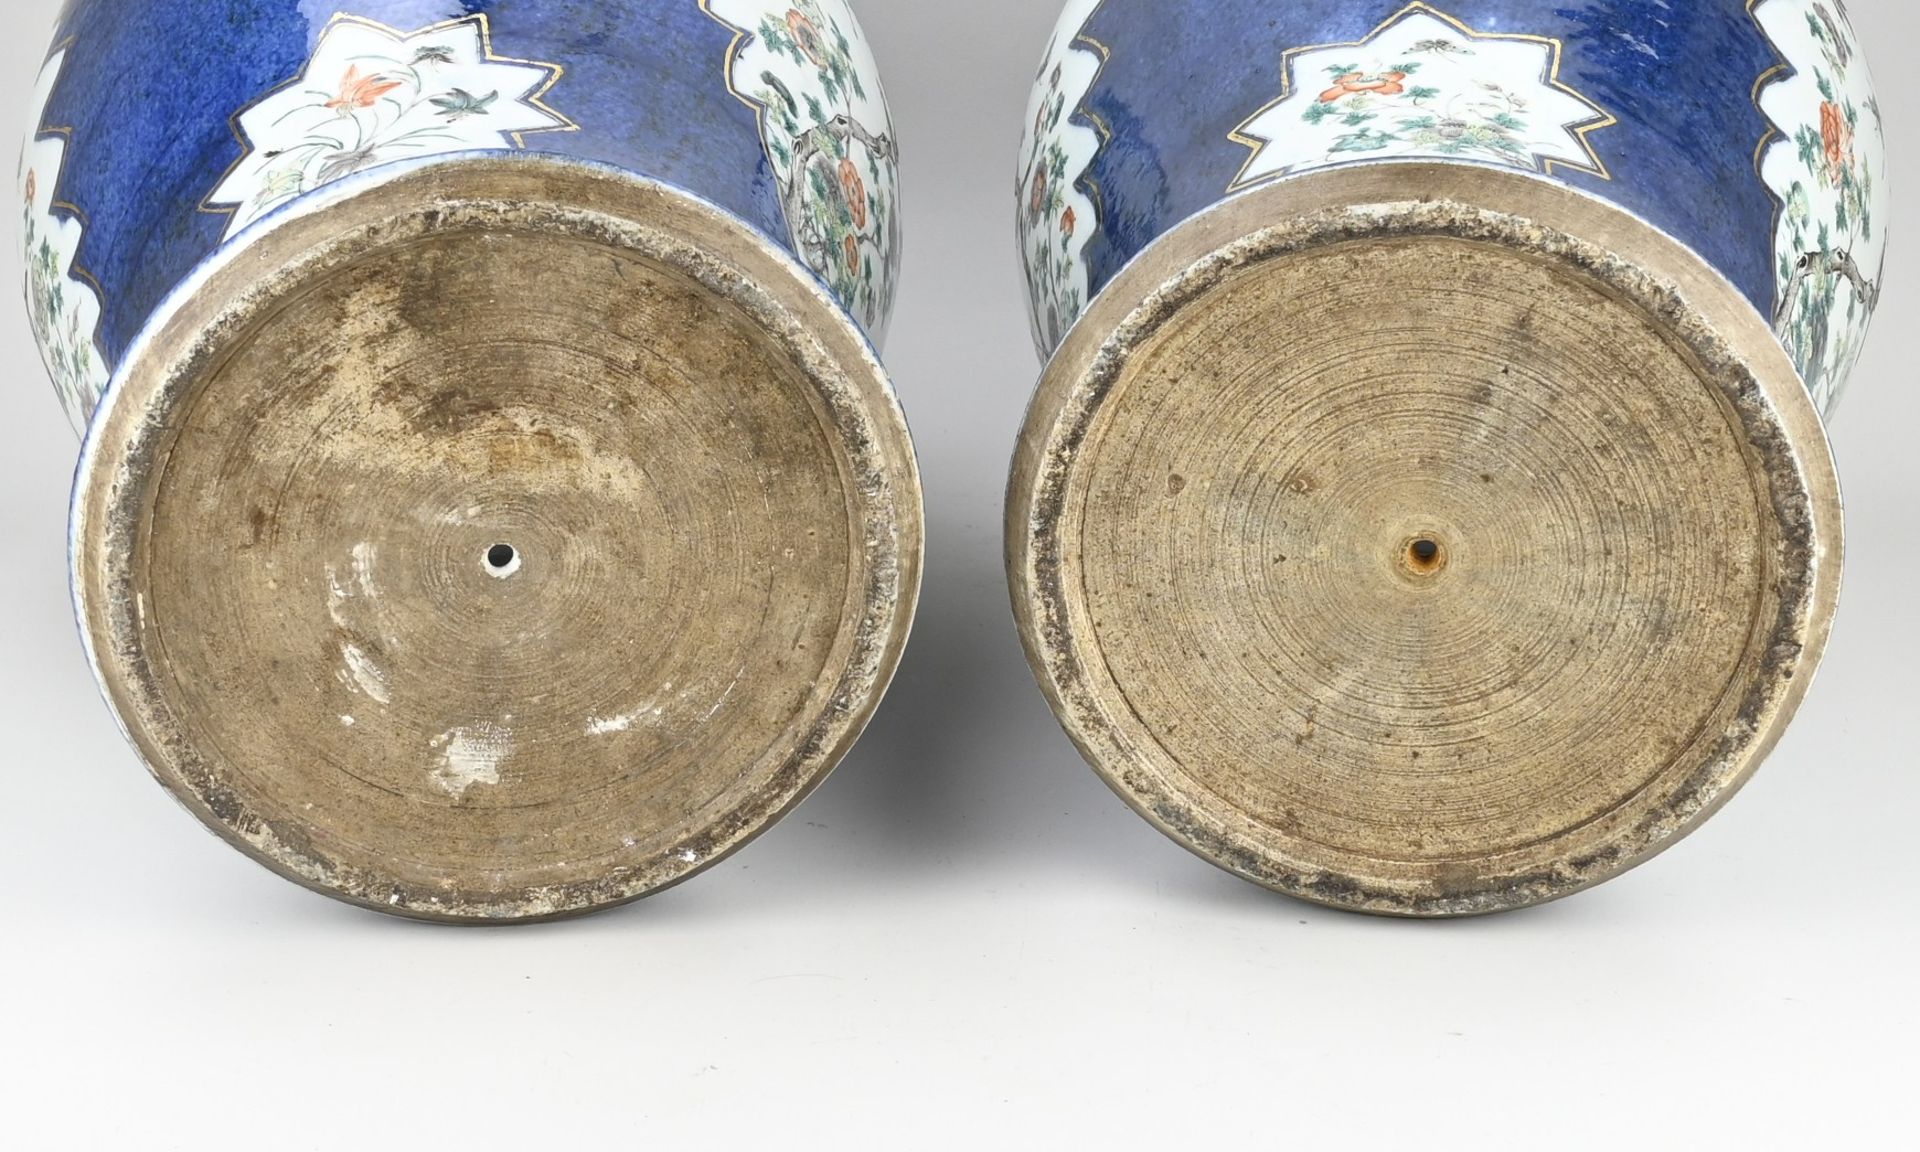 Two capital 18th century Chinese vases, H 70 x Ø 34 cm. - Image 3 of 3